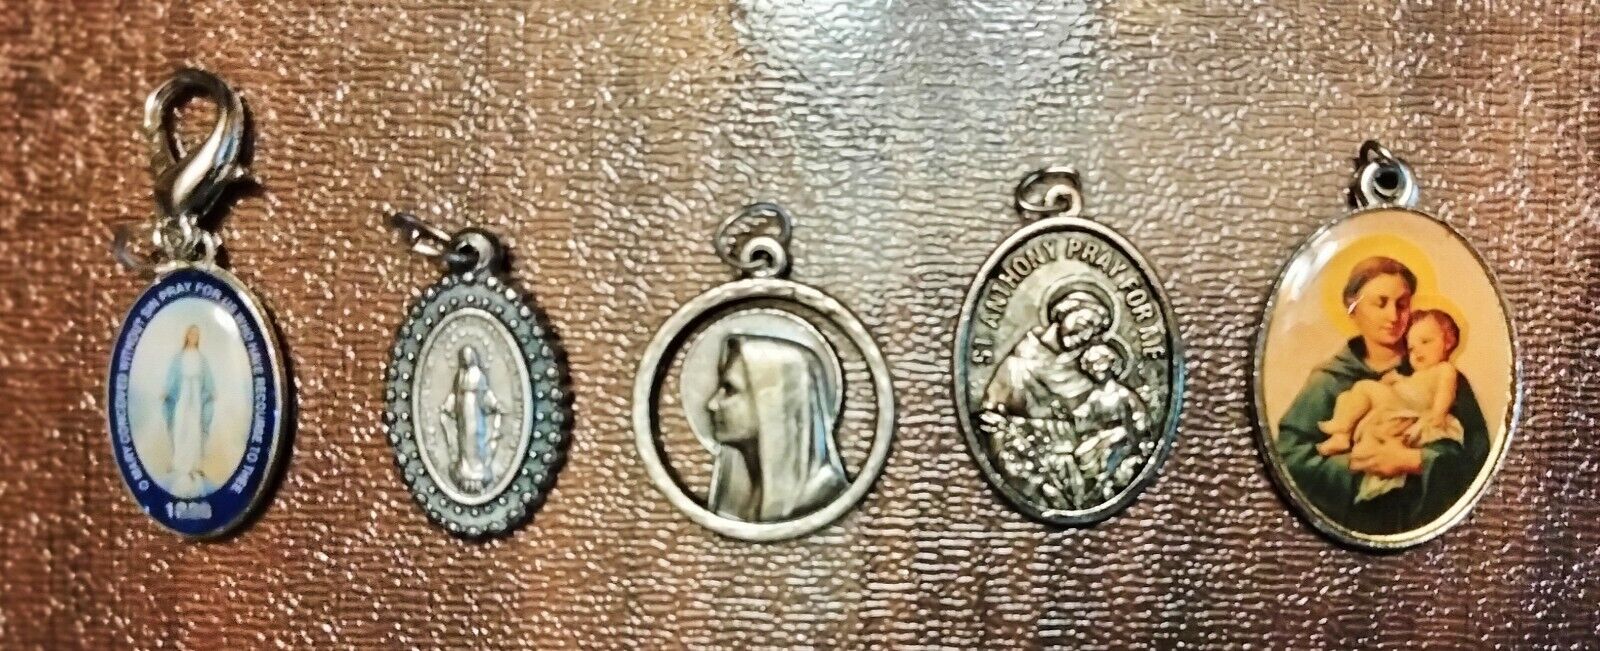 Lot of 5 Catholic Saint Religious Holy Medals, Charms, Pendants.